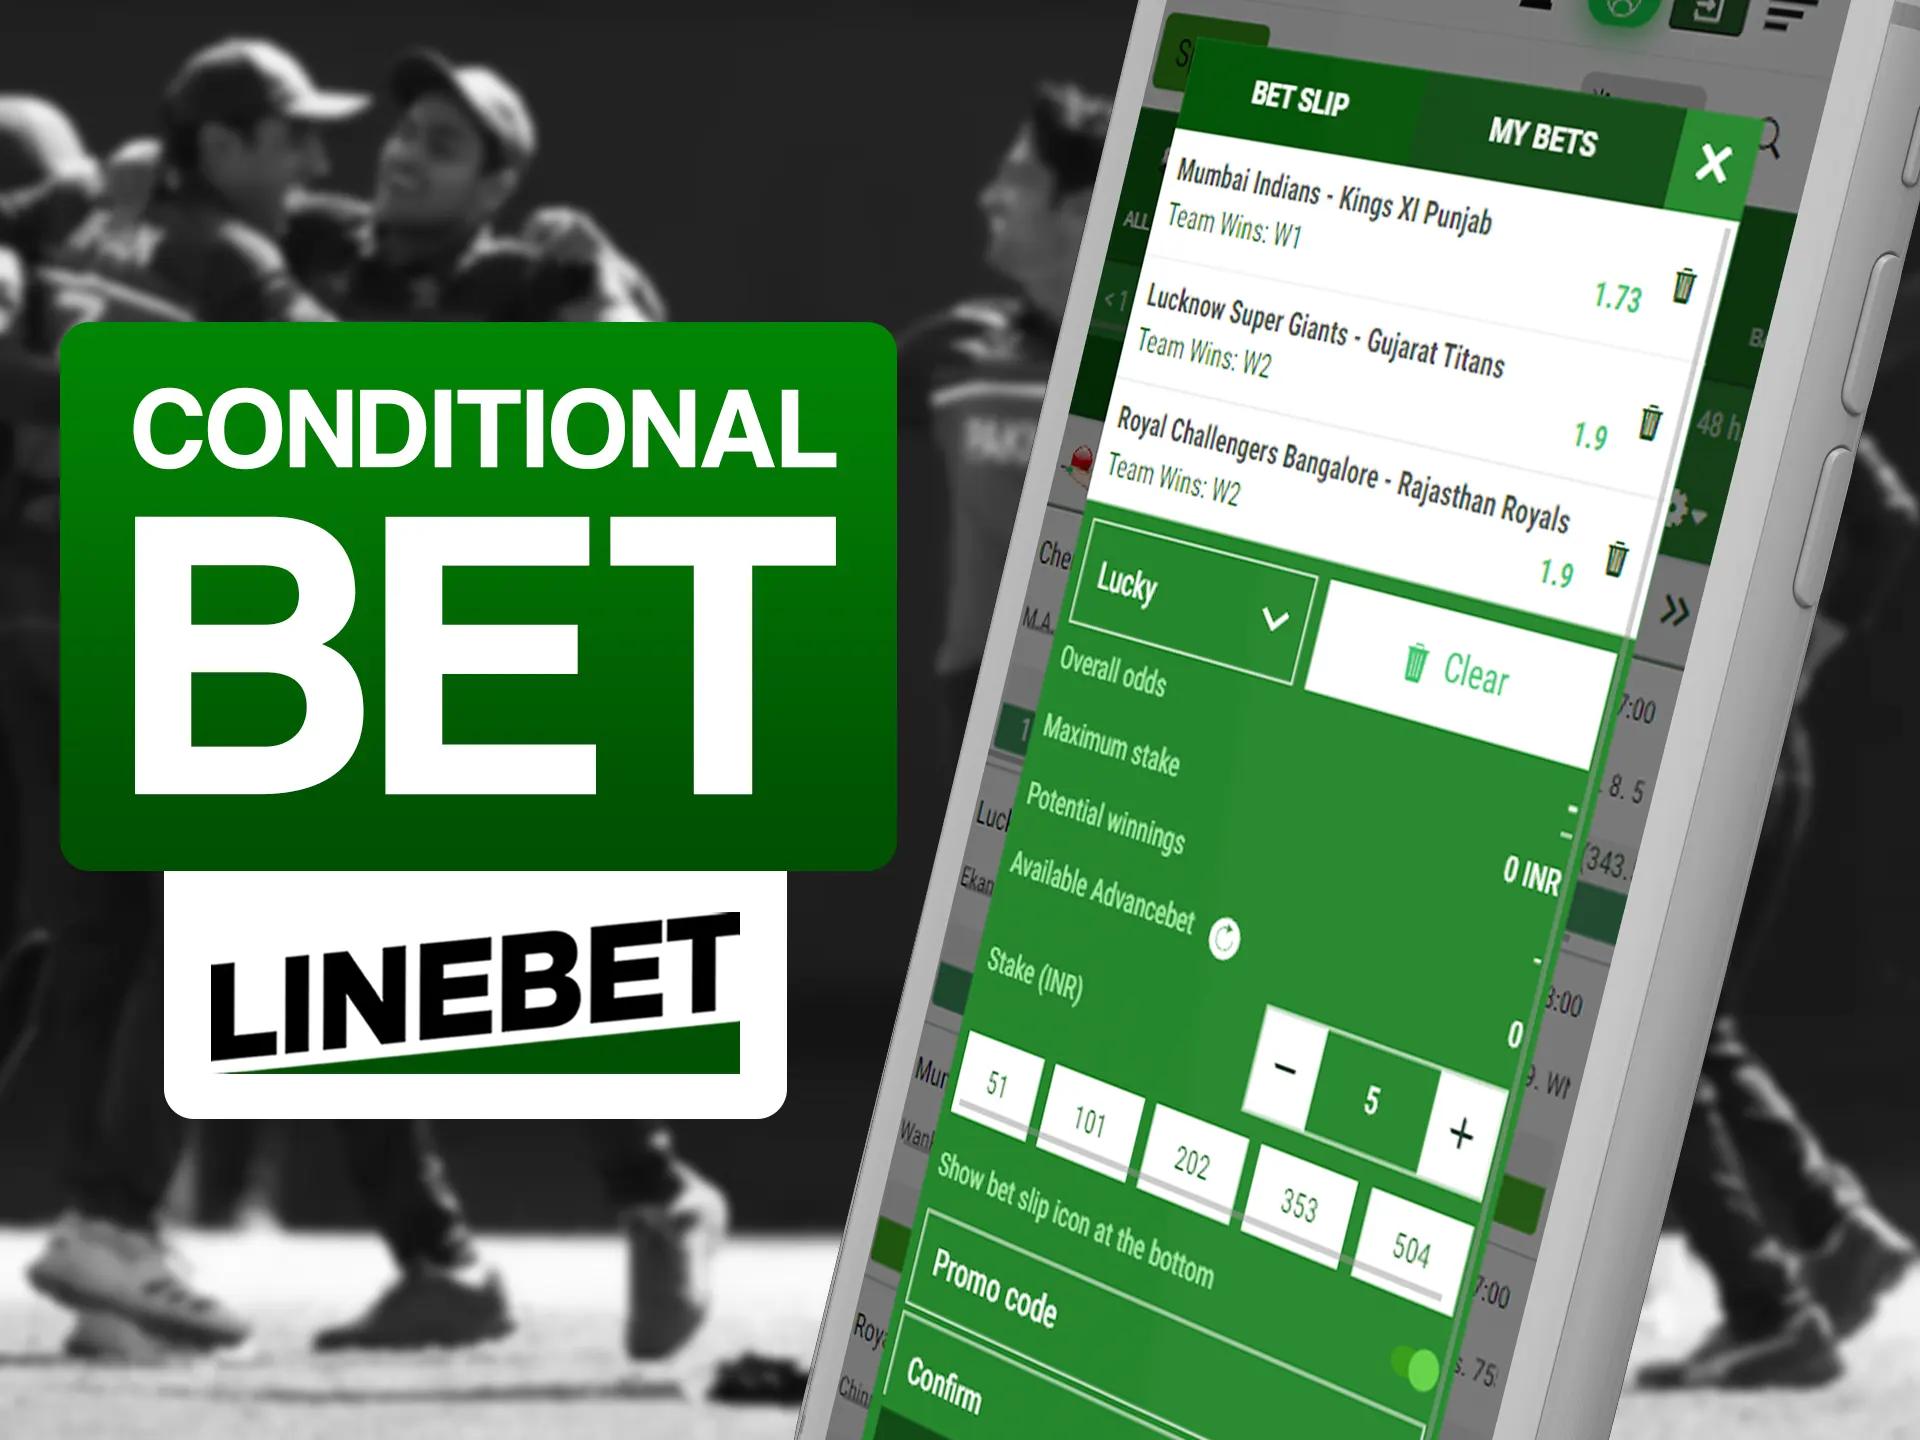 Make bet on multiple teams in one time and win biggest amount of money at Linebet.